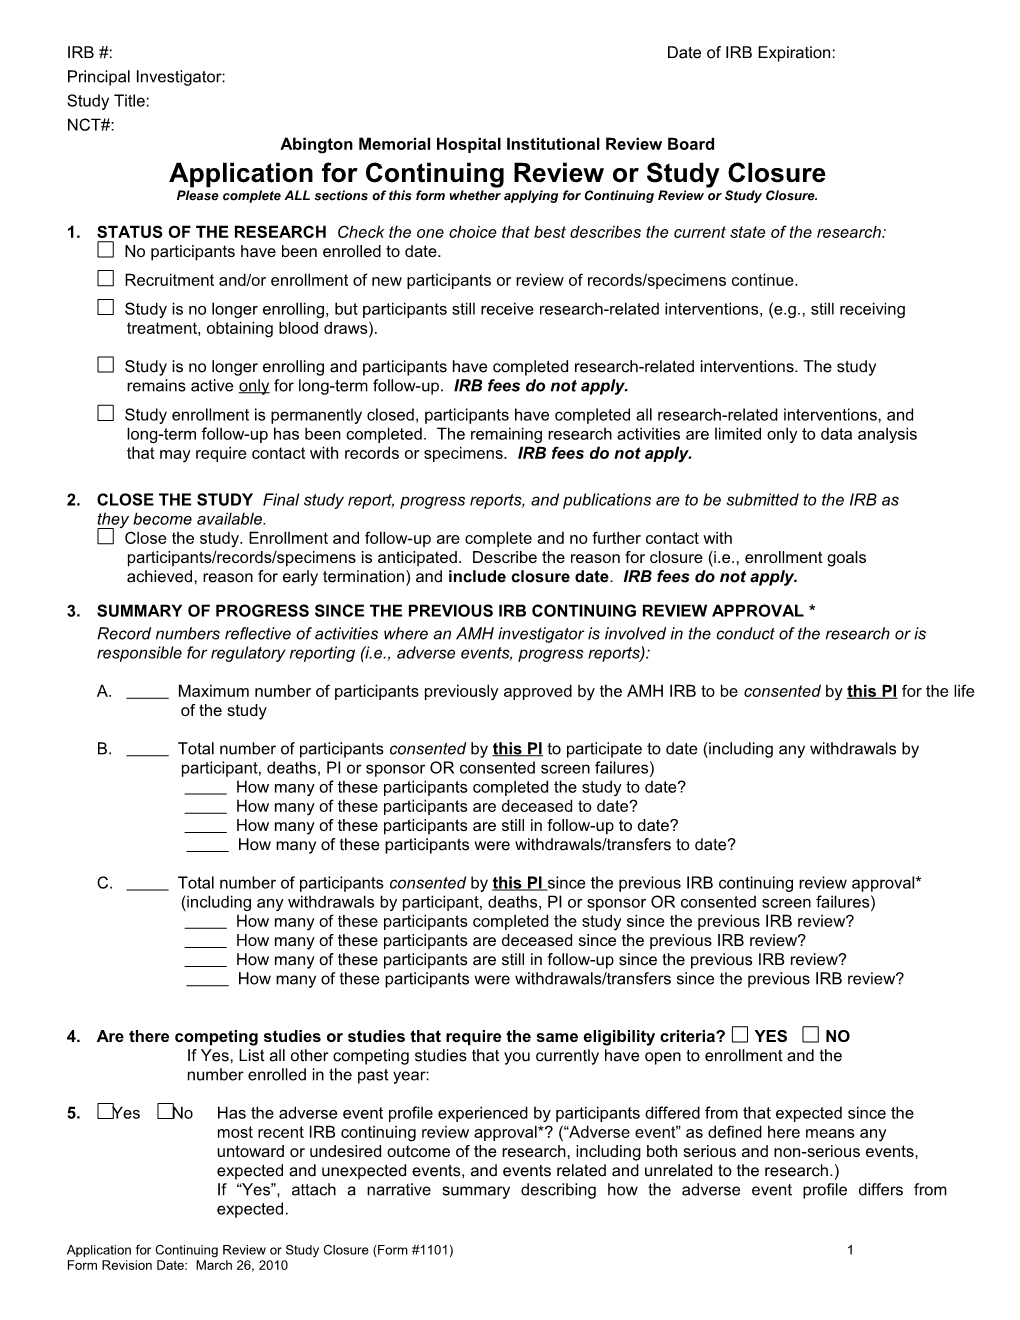 Application For Continuing Review And Study Closure